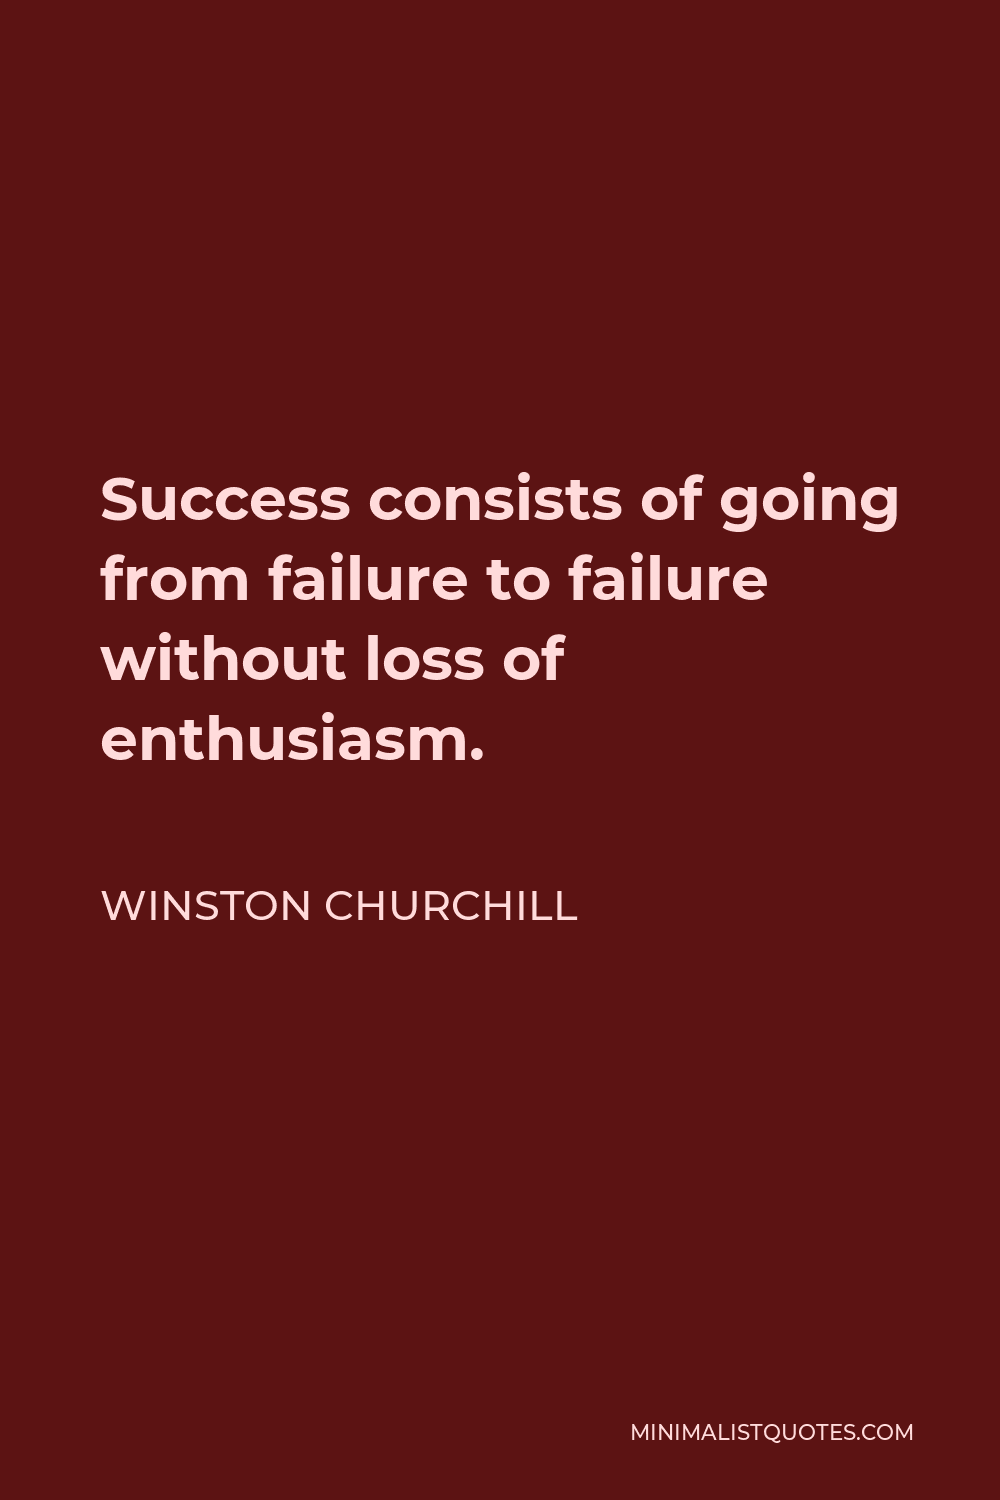 Winston Churchill Quote - Success consists of going from failure to failure without loss of enthusiasm.